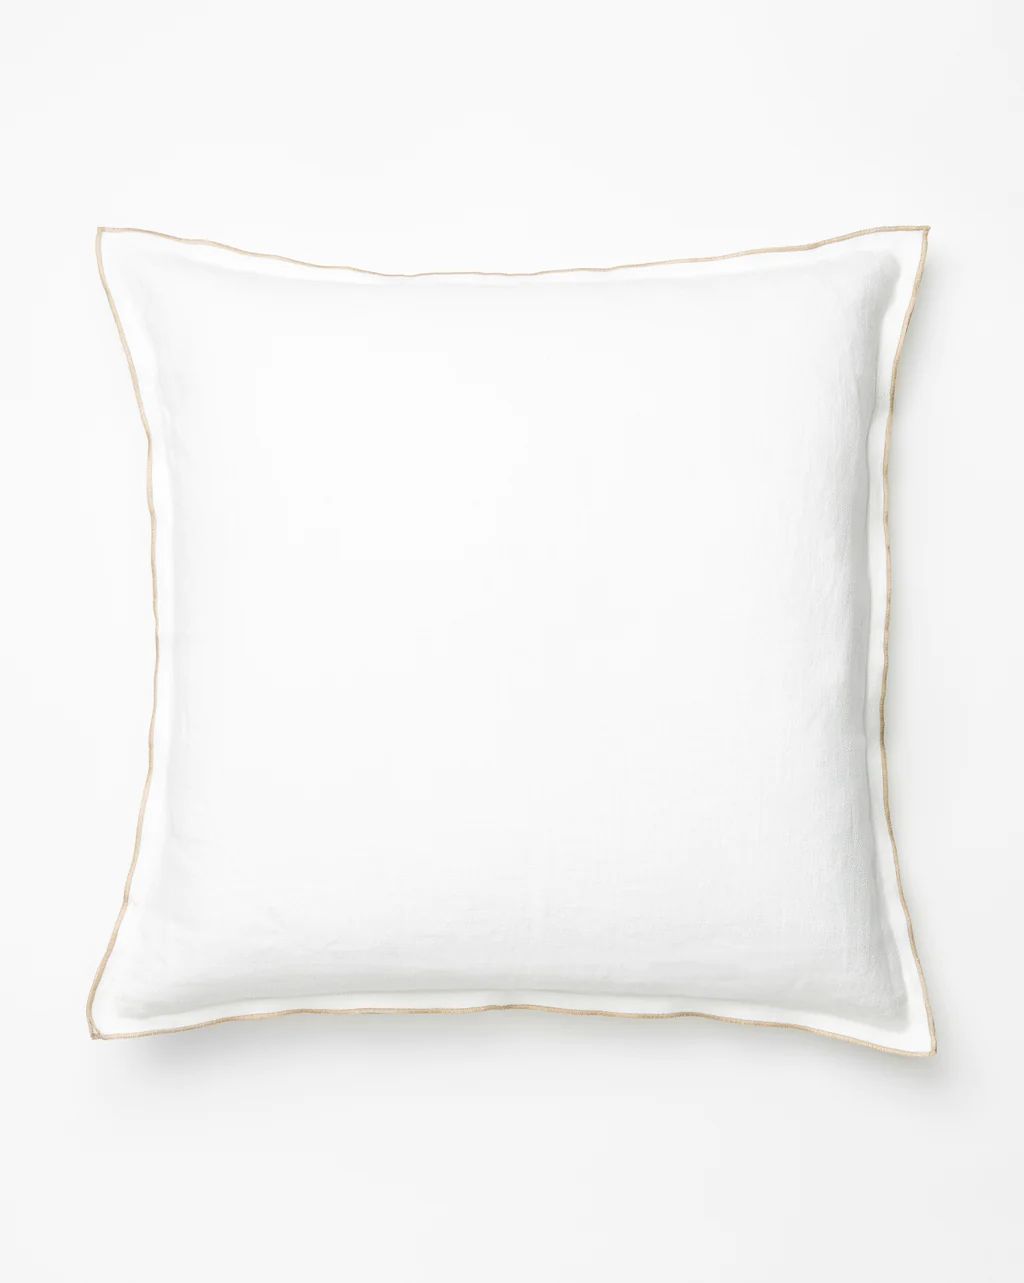 Arla Double Flange Pillow Cover | McGee & Co.